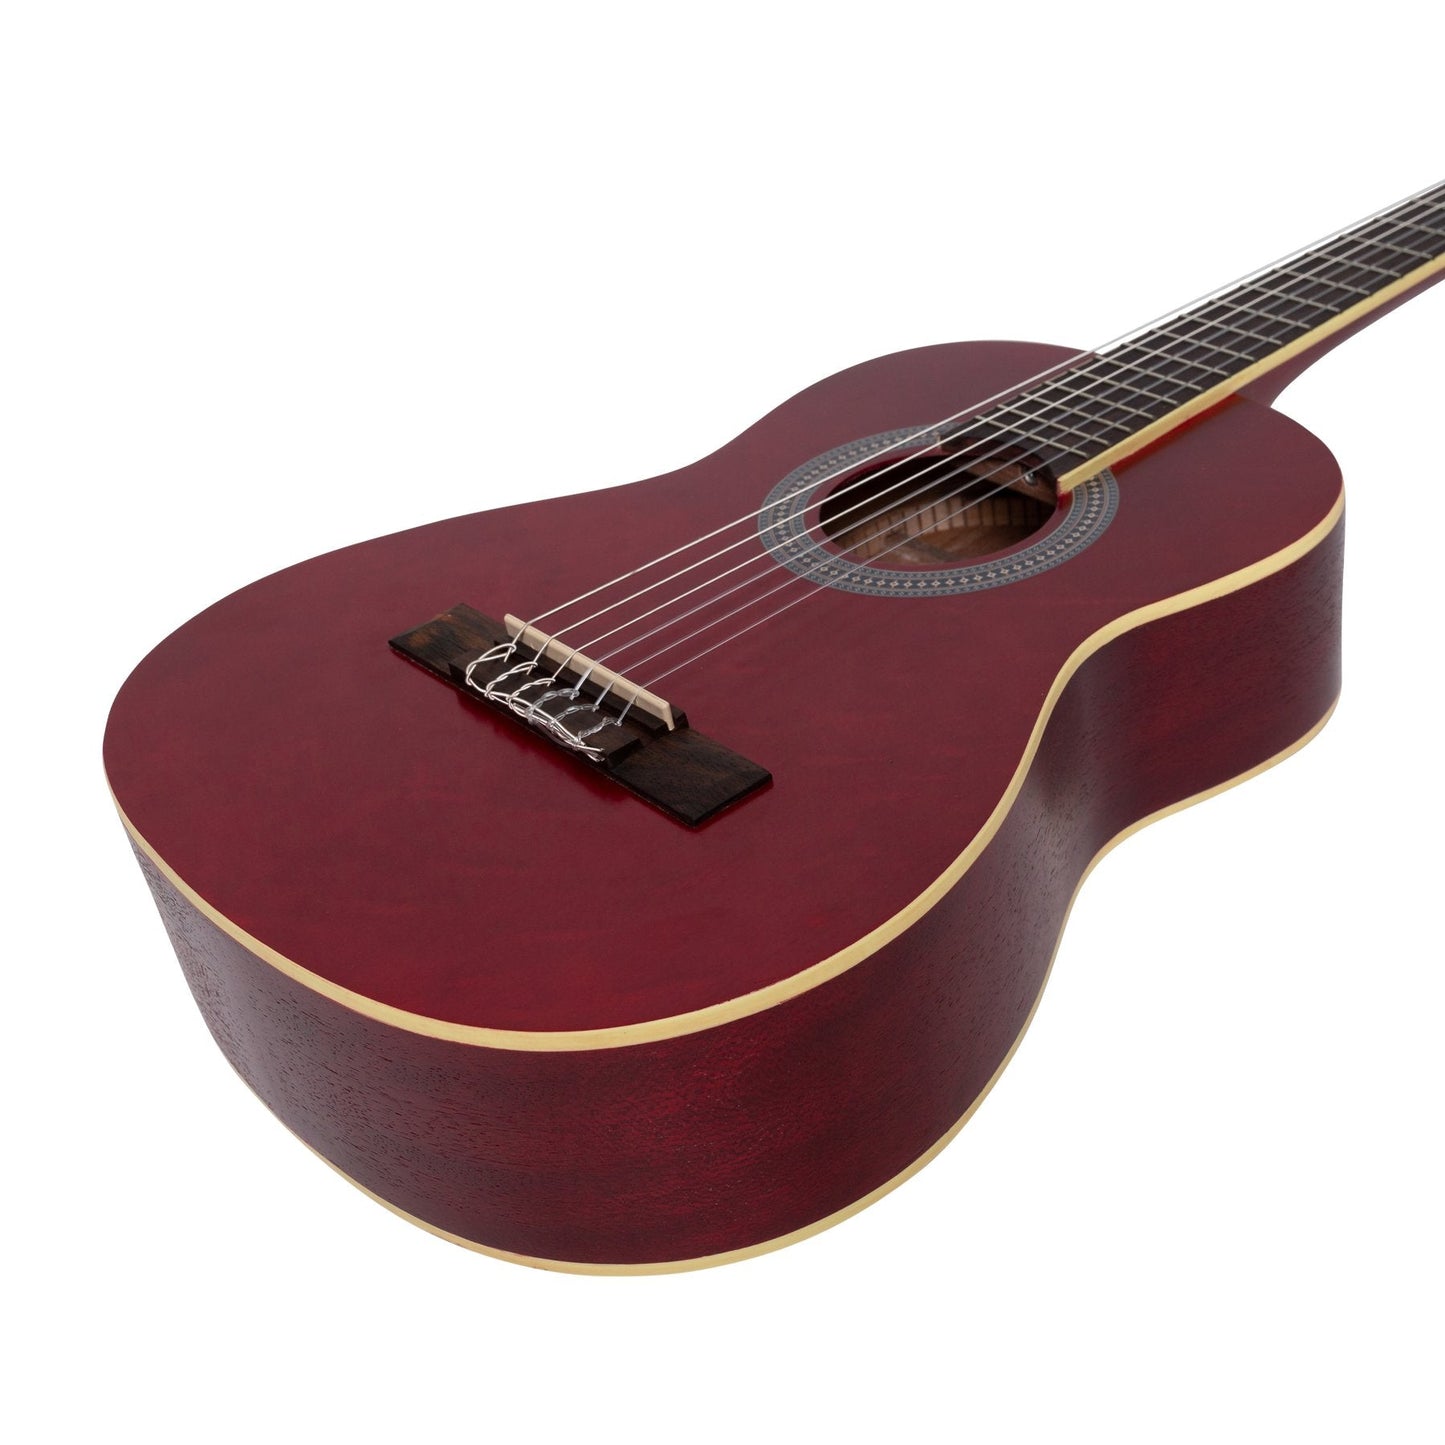 Load image into Gallery viewer, Sanchez 1/2 Size Student Classical Guitar (Wine Red)
